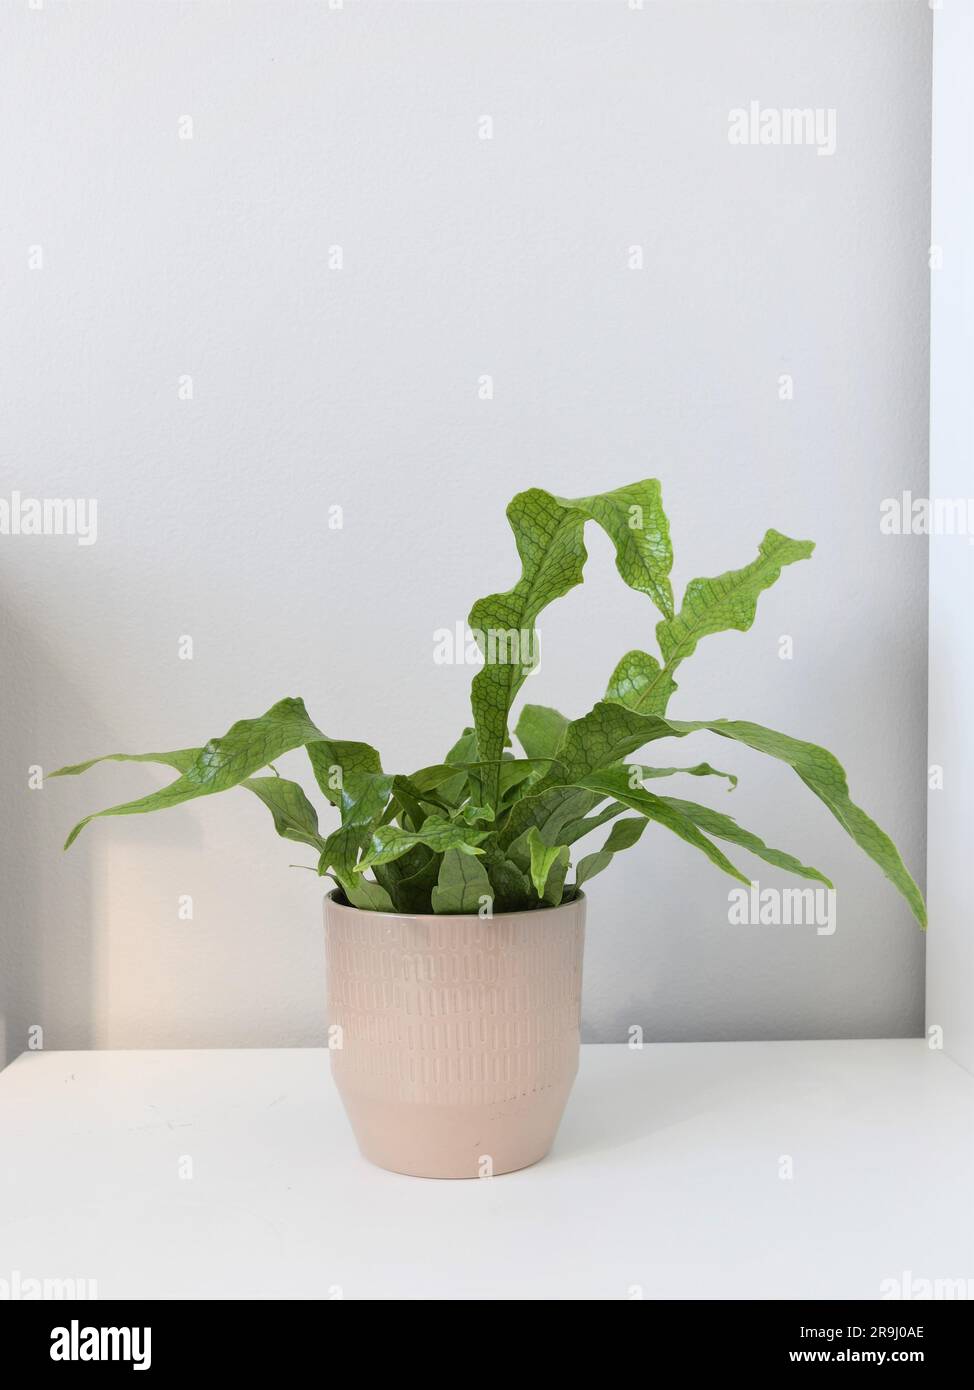 Crocodile fern (Microsorum musifolium) houseplant with a crocodile scale pattern on its leaves. Green fronds in a gray pot, isolated against white. Stock Photo